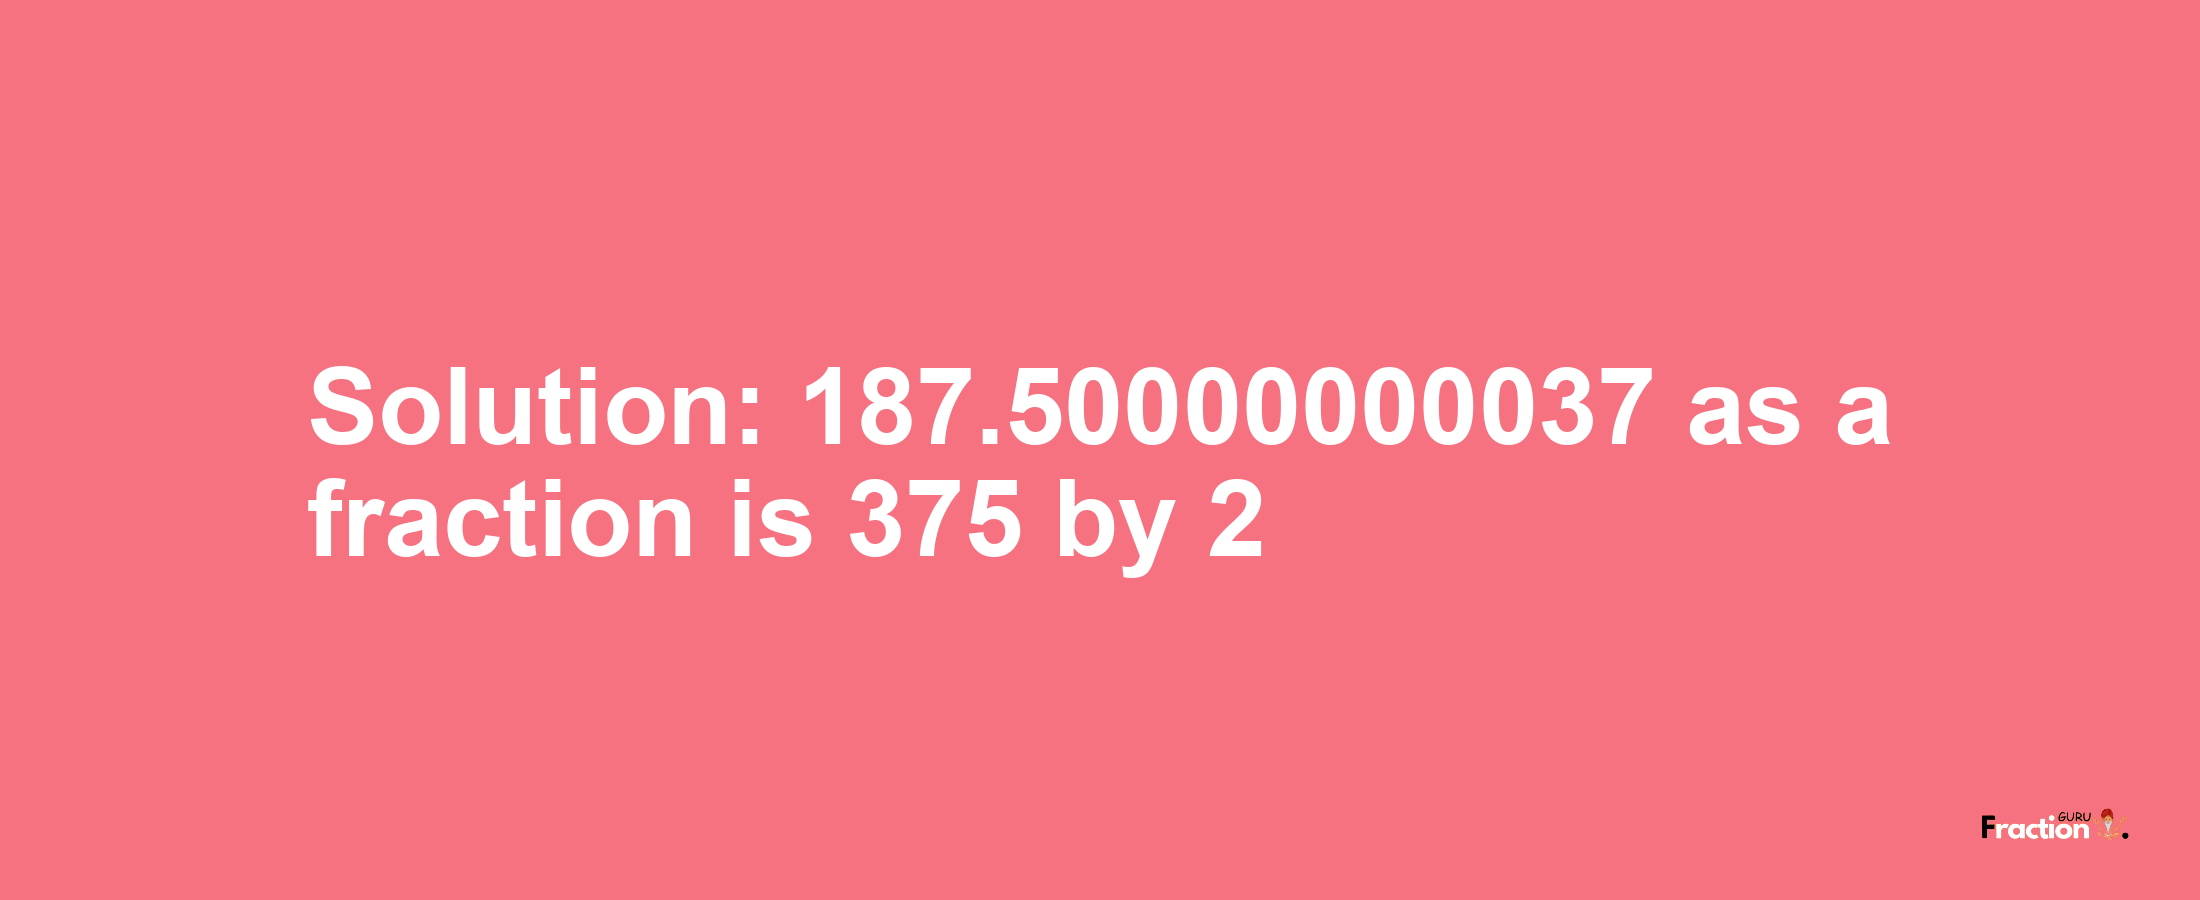 Solution:187.50000000037 as a fraction is 375/2